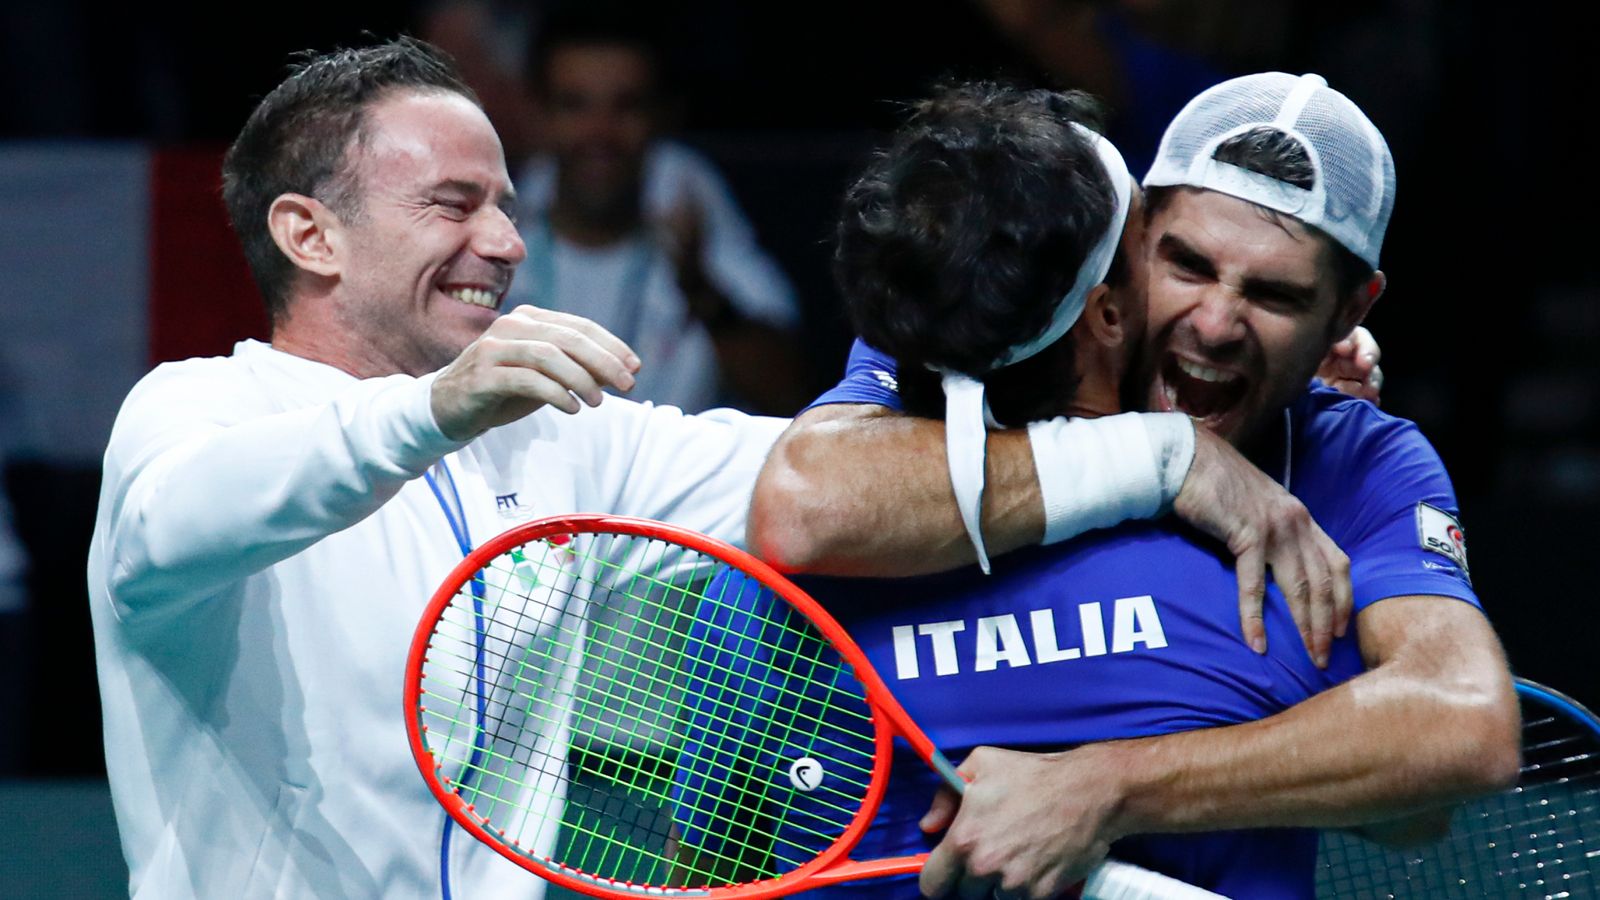 Davis Cup 2022: USA dumped out by Italy at quarter-final stage as wait for record-extending 33rd title goes on